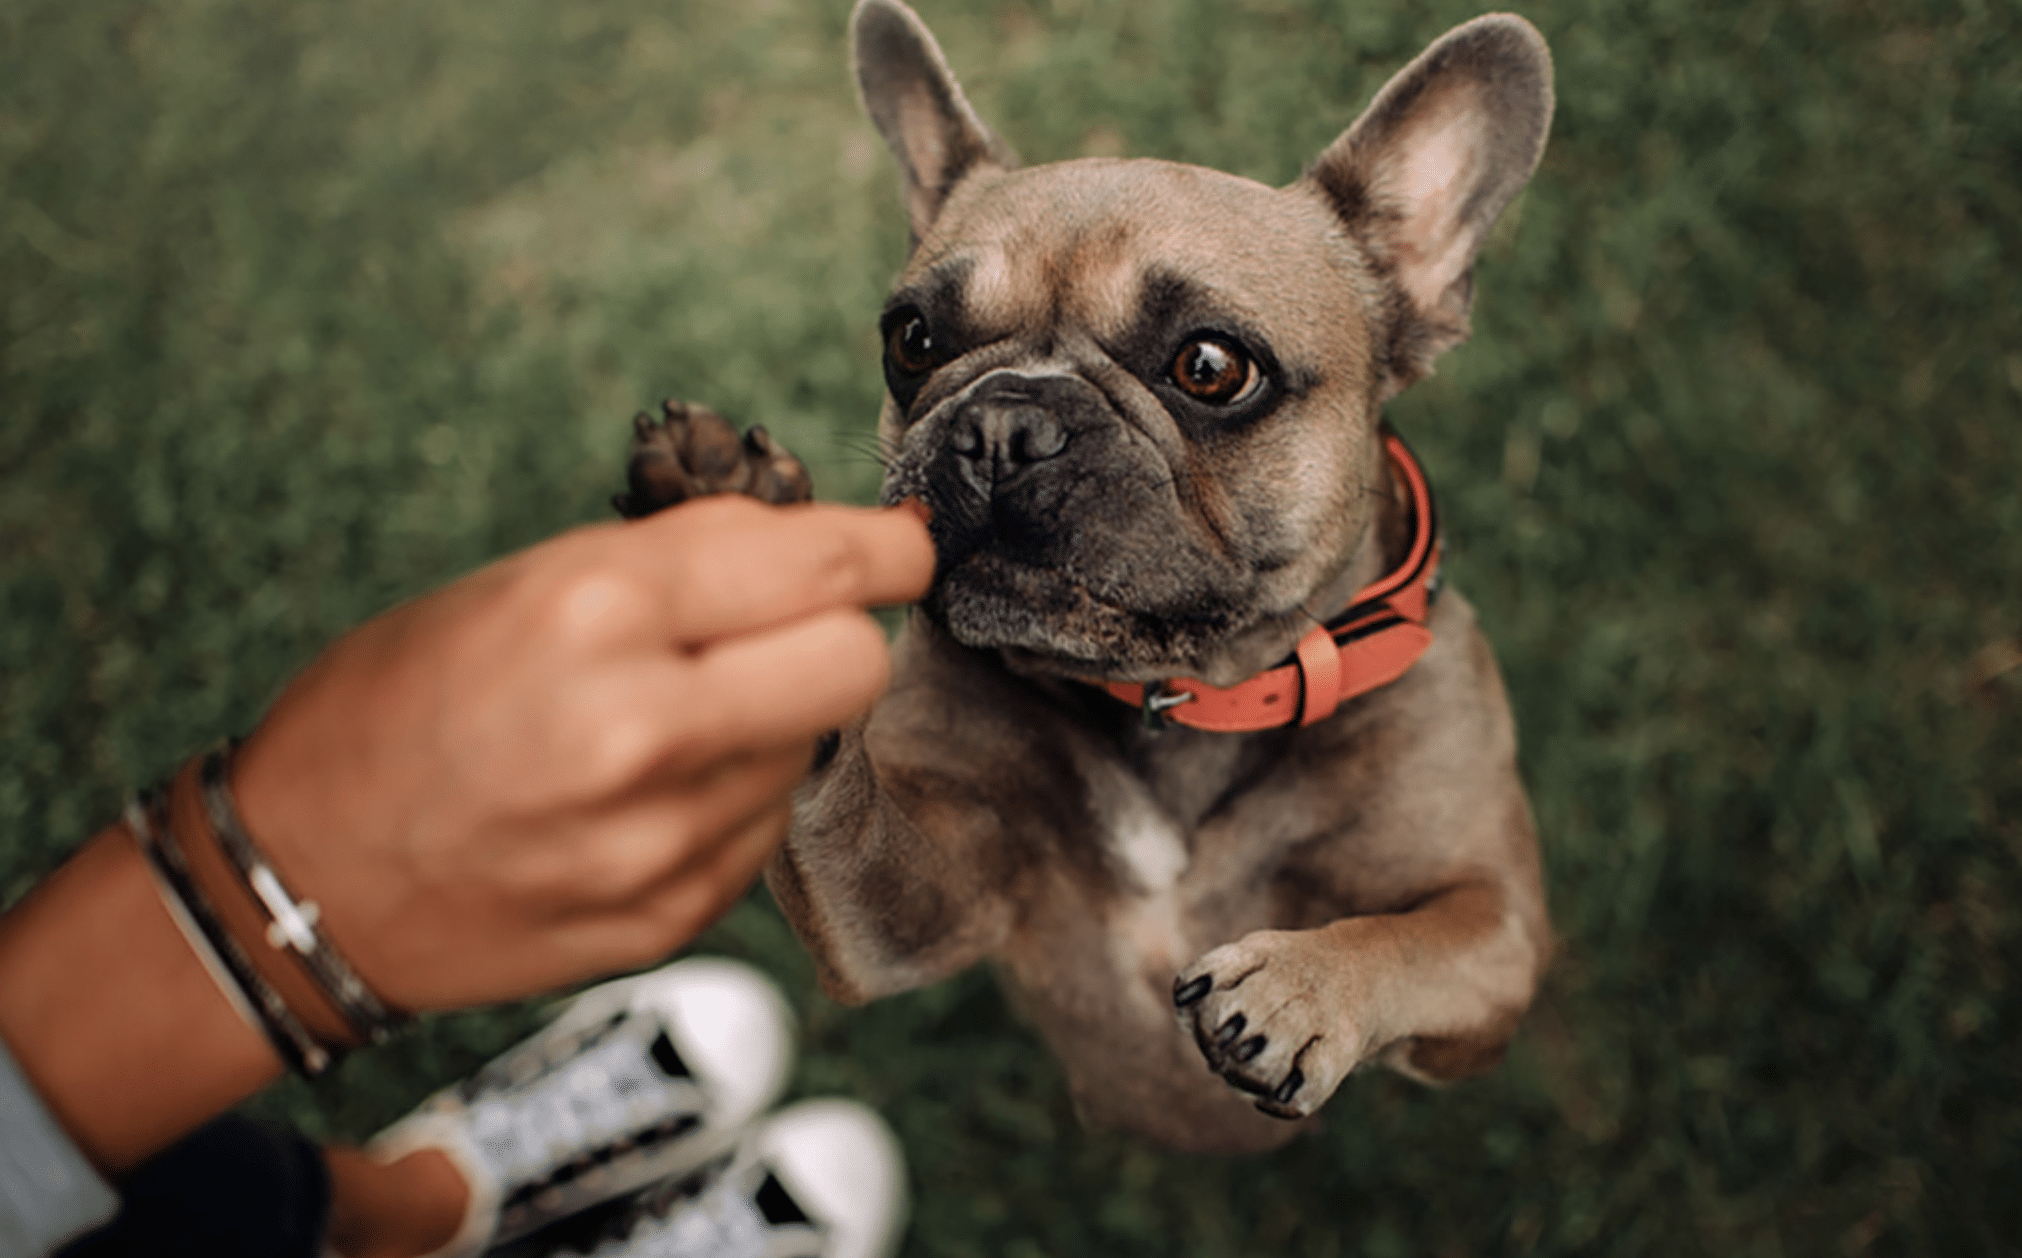 Herbal Dog Treats The Tasty Way to Boost Your Pup's Wellness